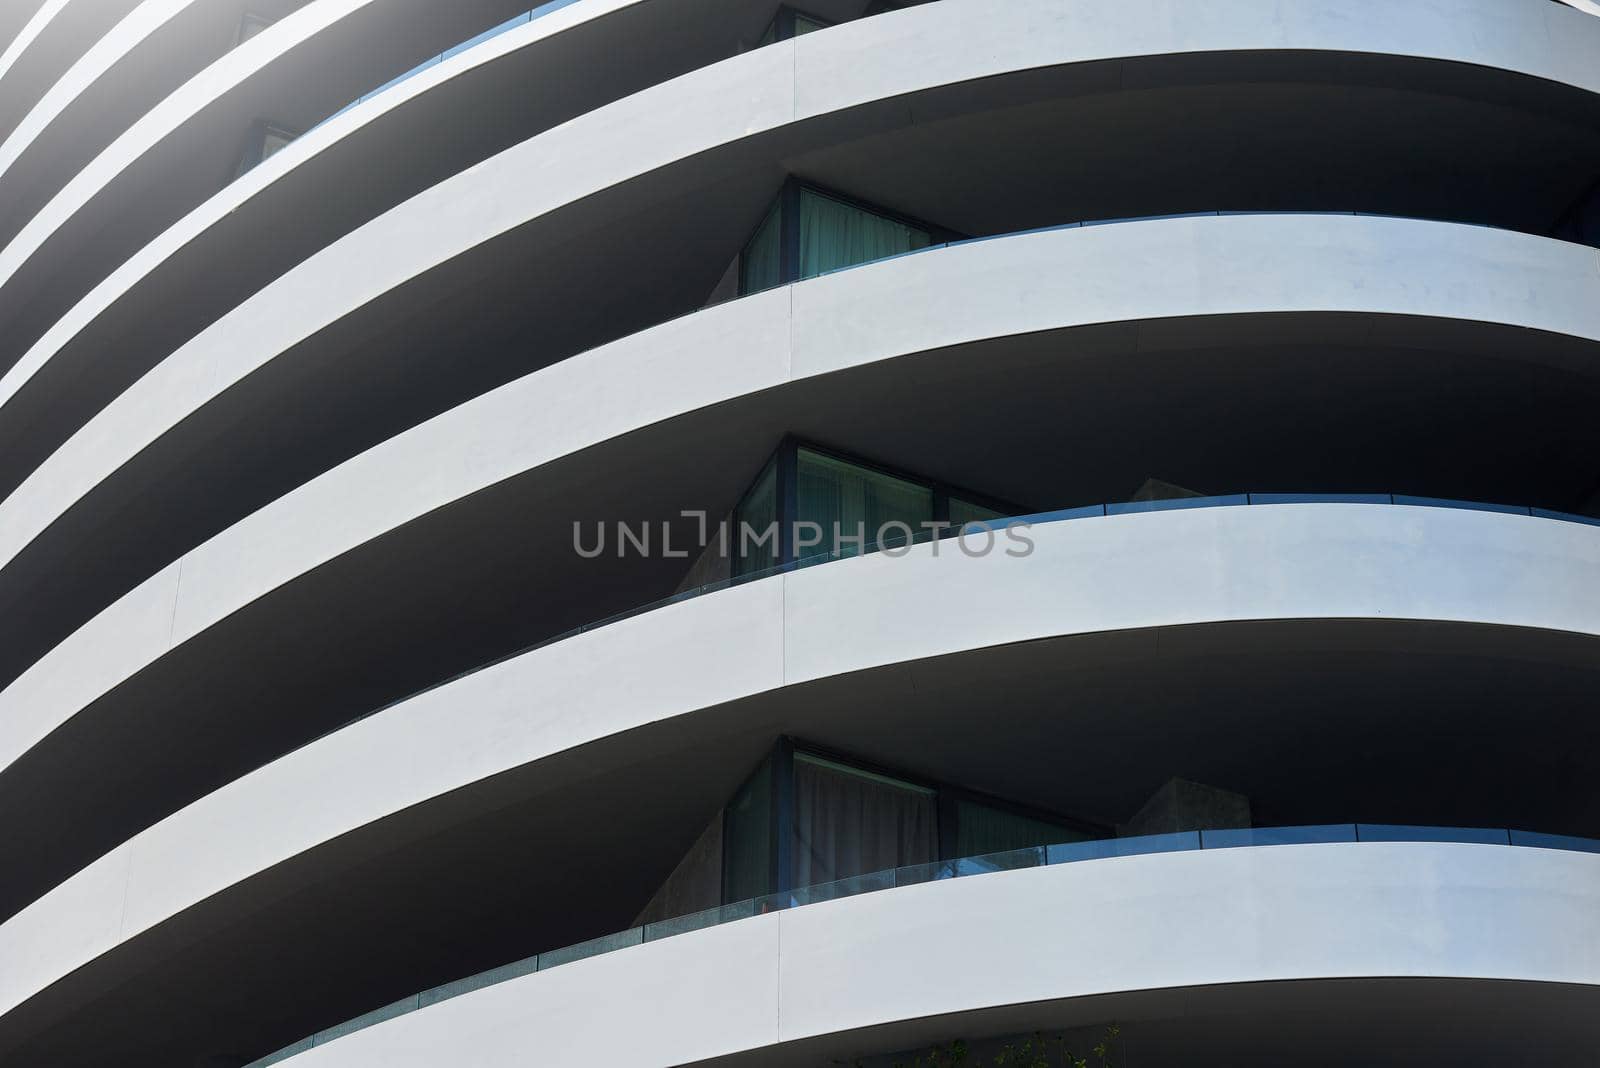 Abstract image of a modern building with rounded edges by iceberg